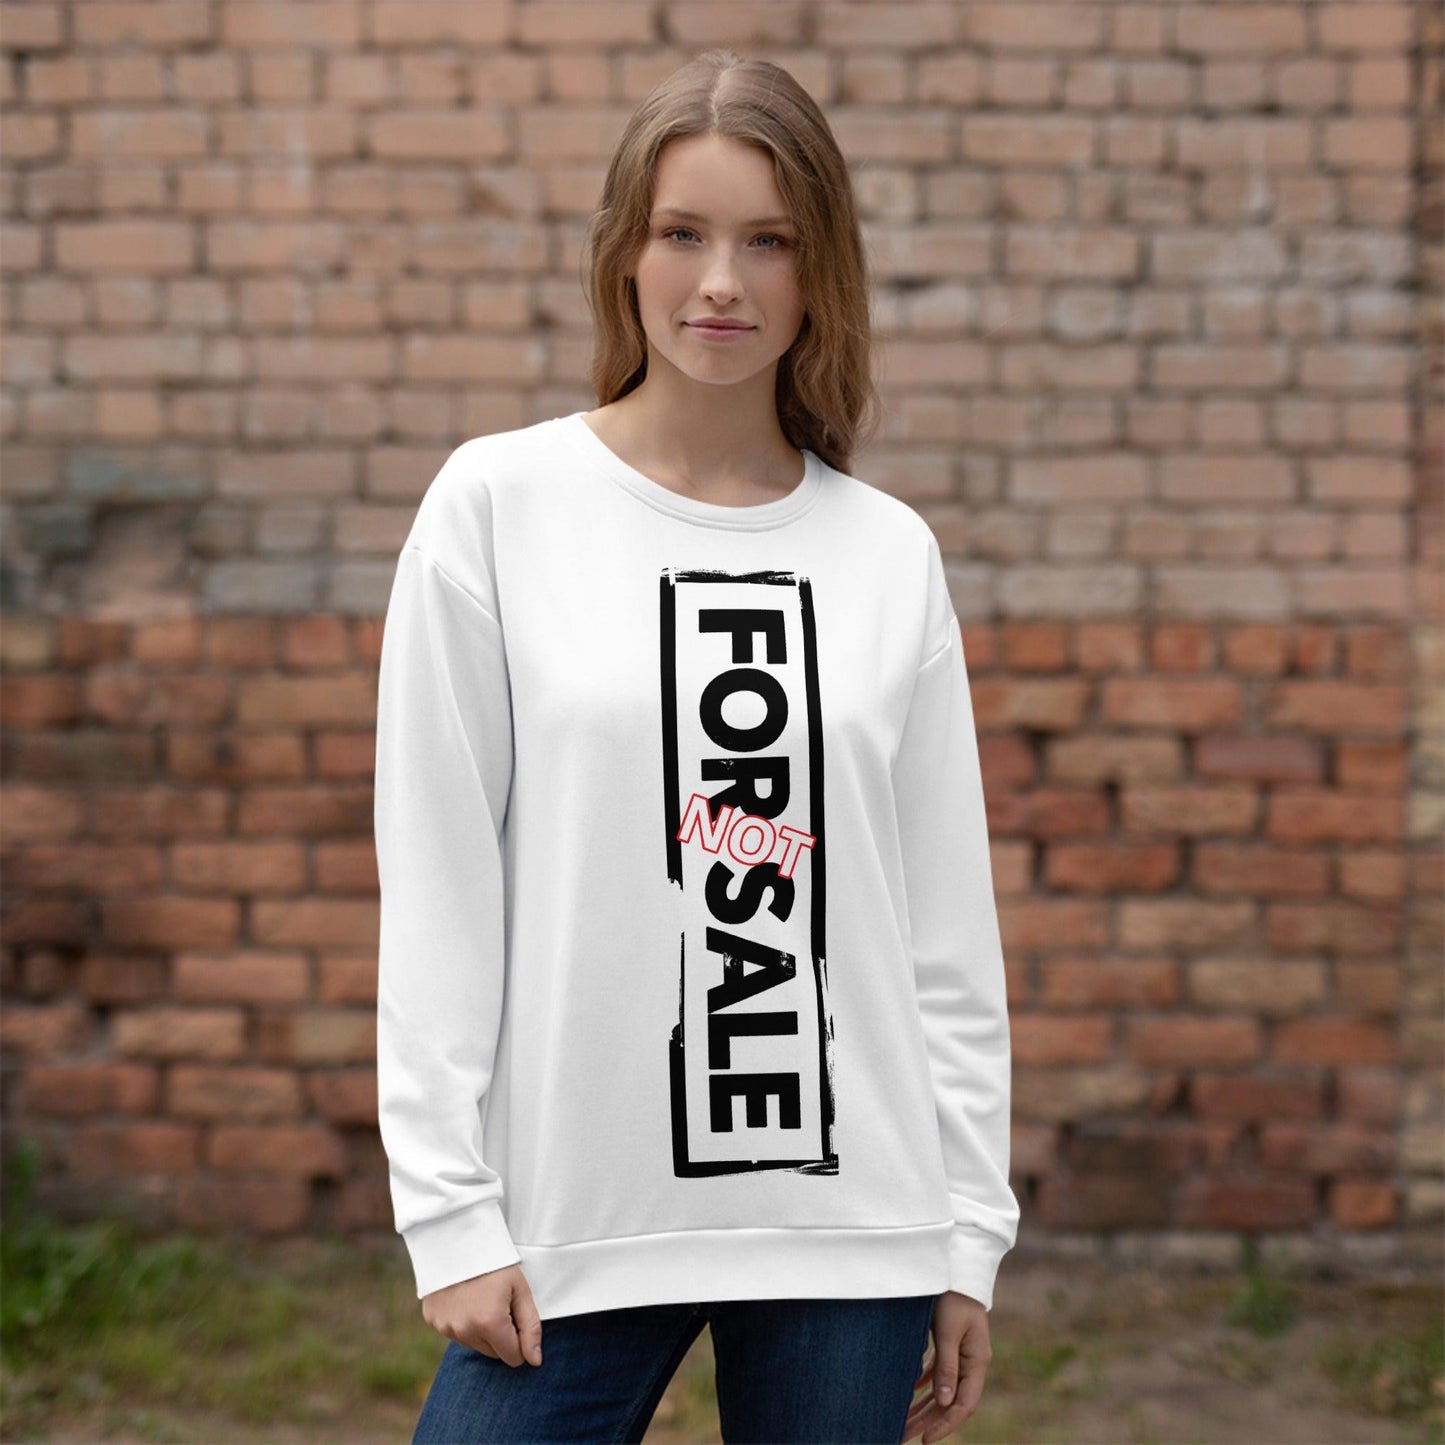 Not For Sale Black Stamp - Unisex Sweatshirt - iSAW Company